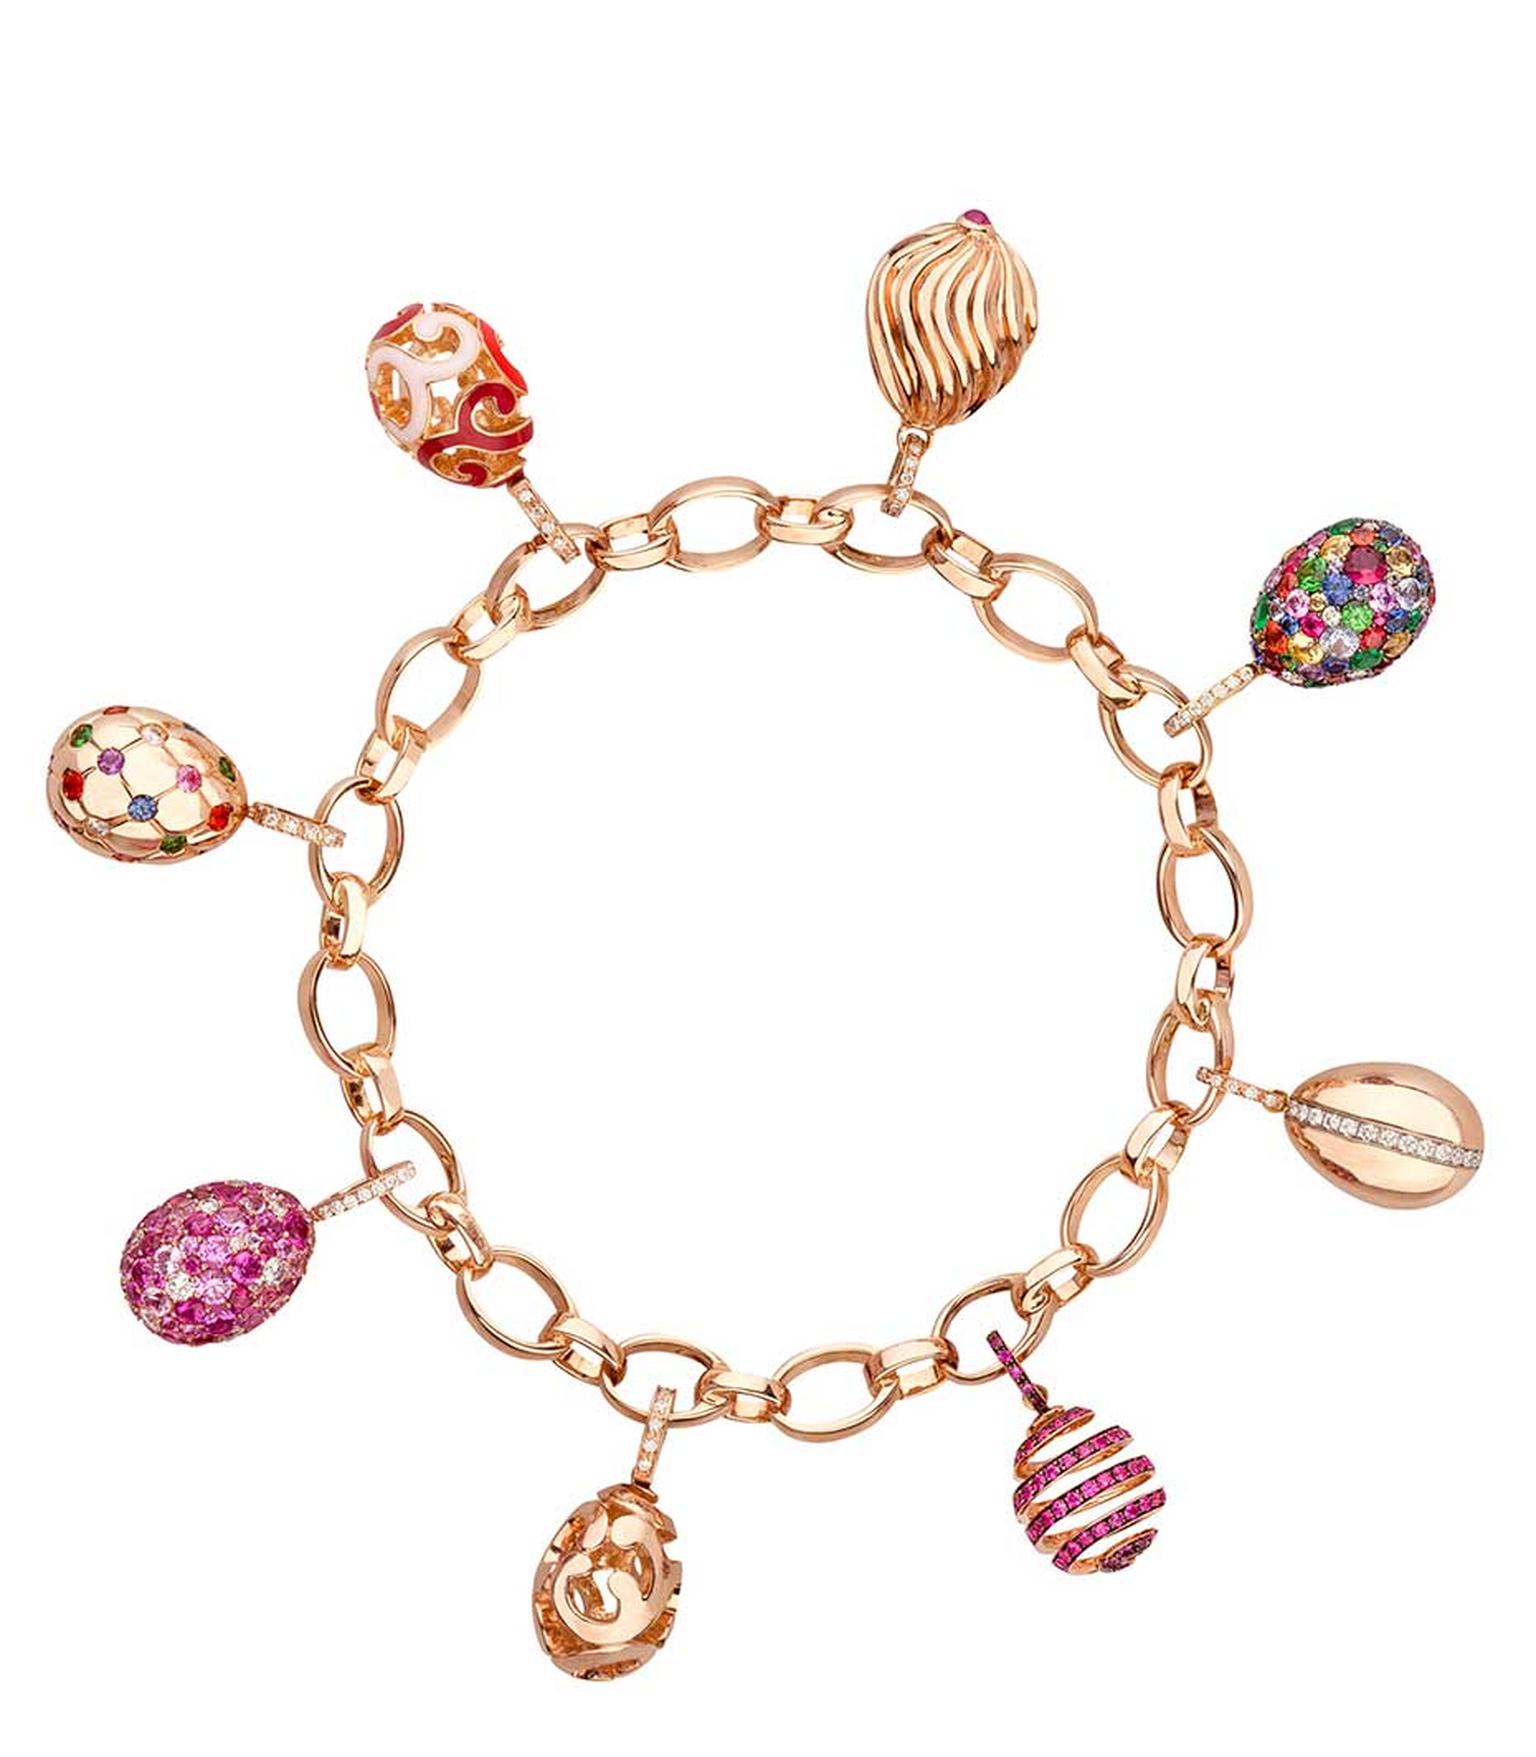 Fabergé rose gold bracelet with eight Fabergé Charms featuring sapphires, amethysts, diamonds, enamel and other coloured gemstones.